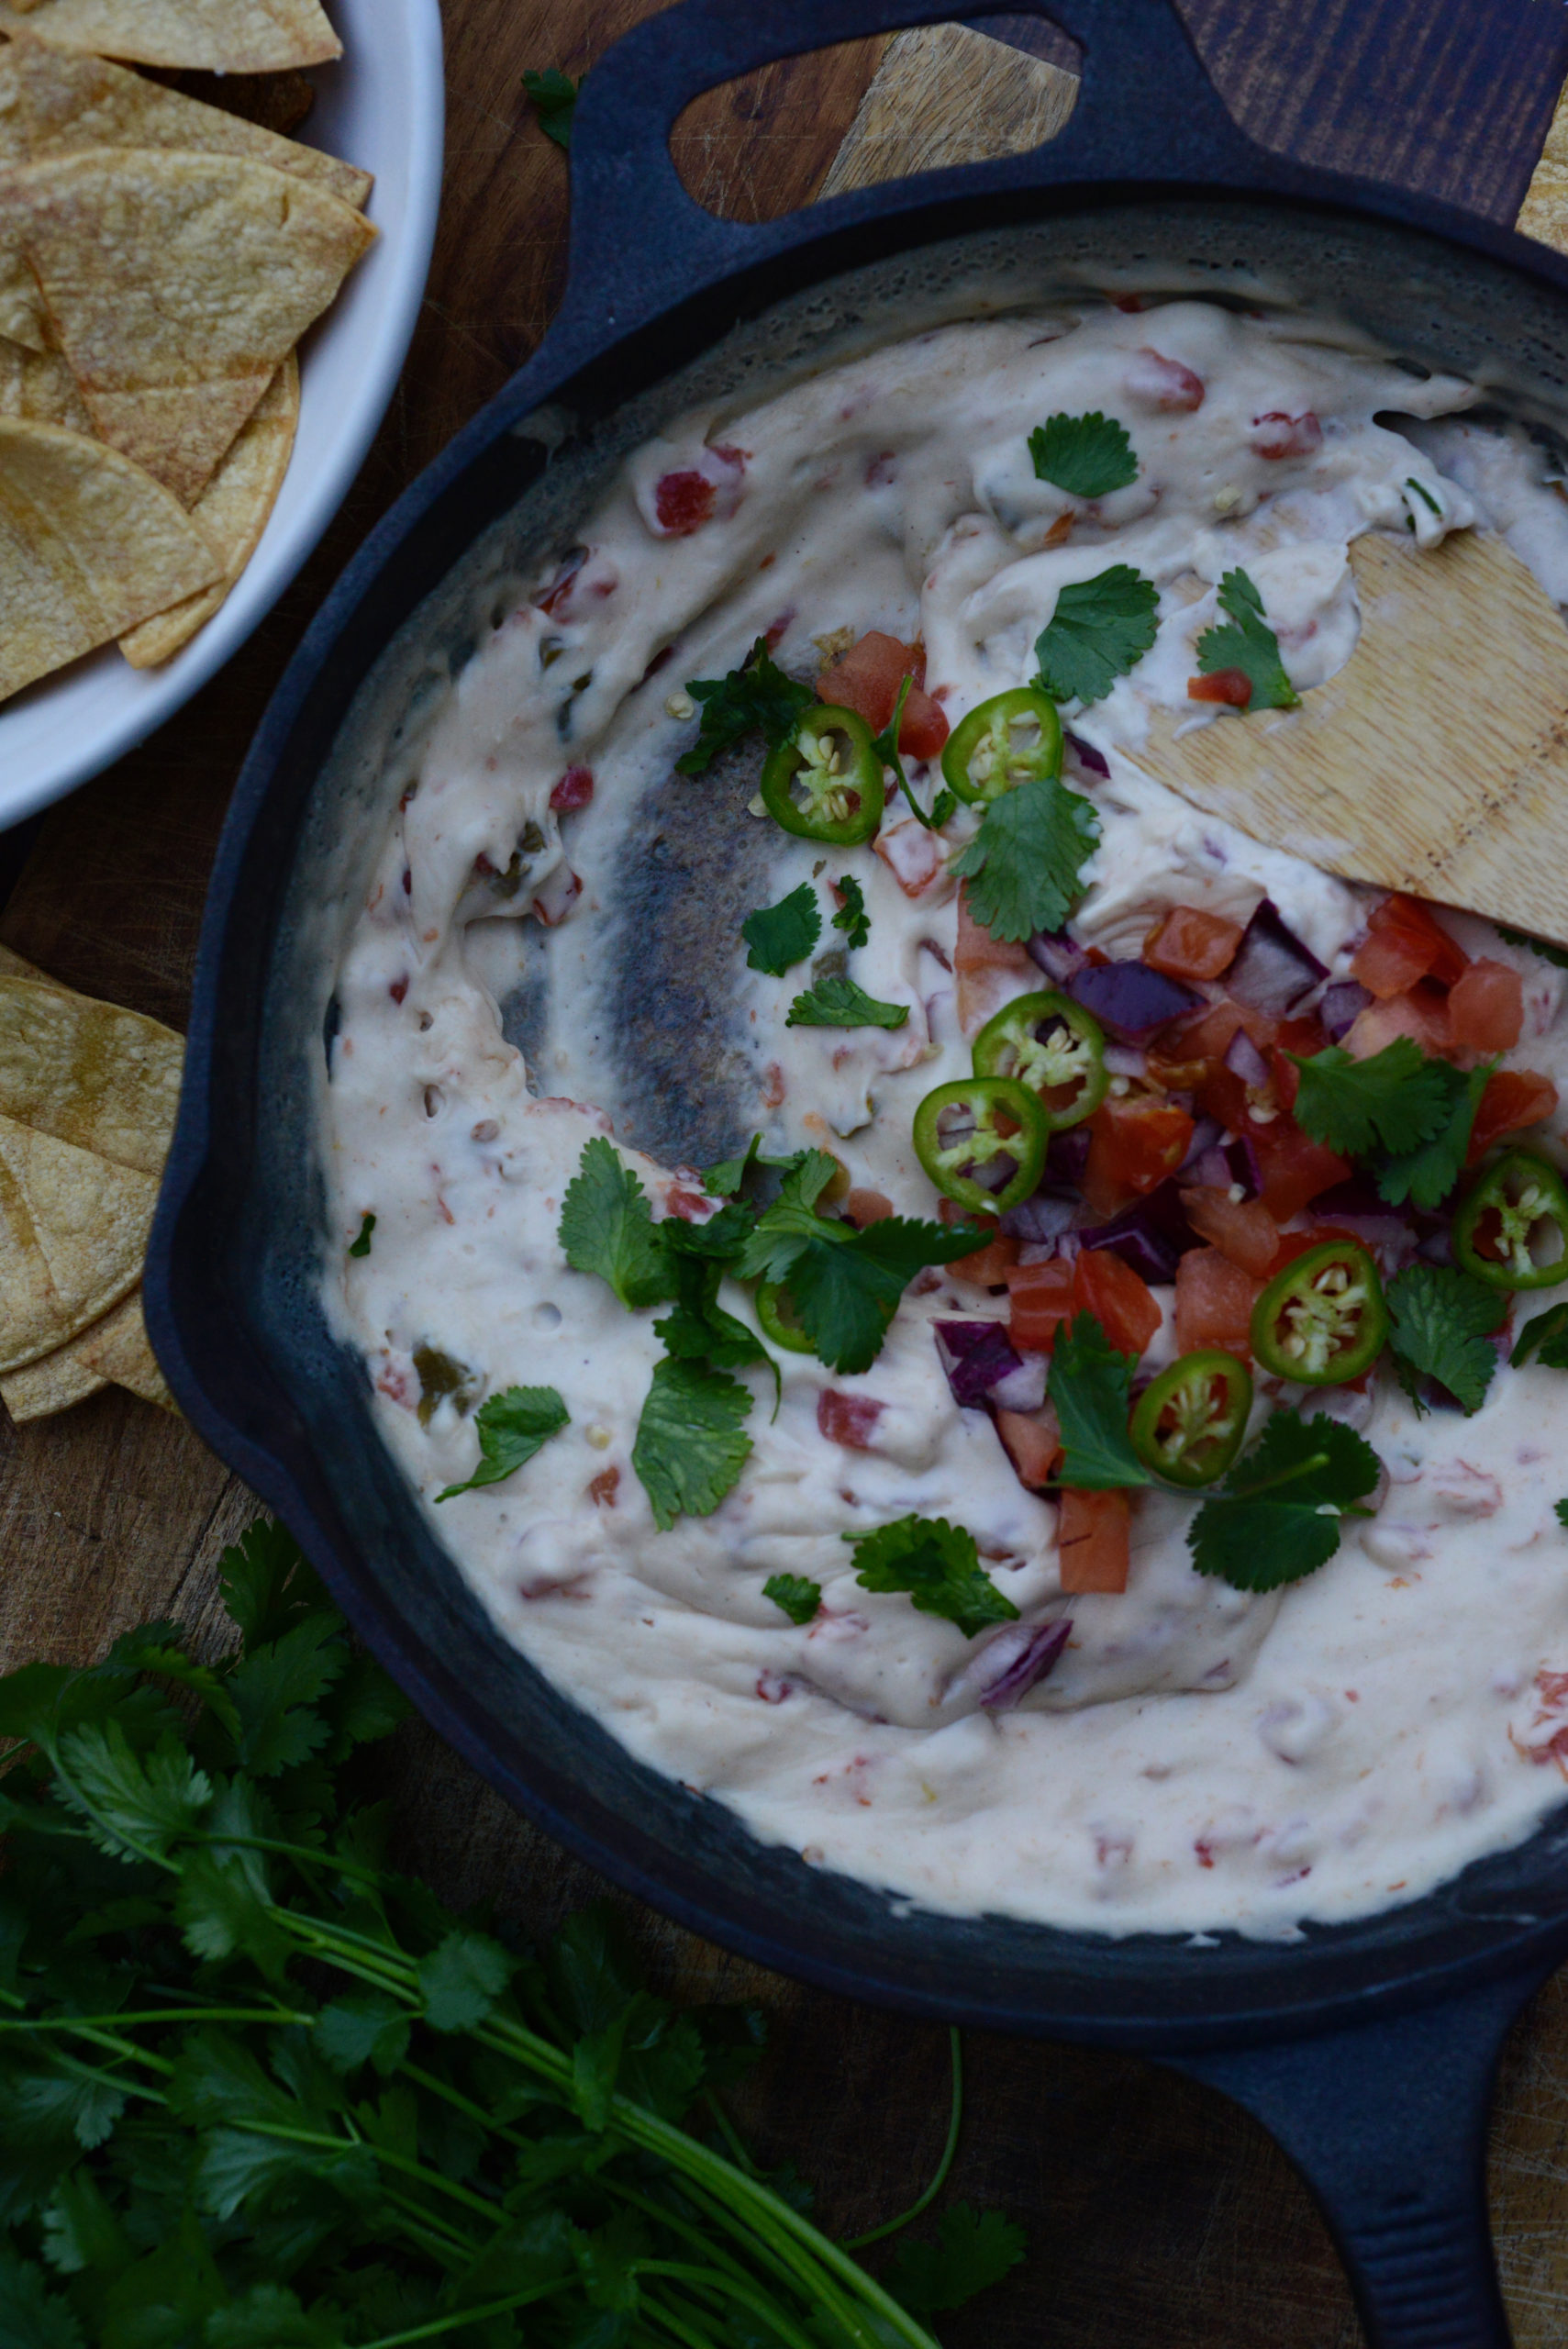 areal shot of queso dip with garnishes of cilantro, tomato, red onion, and chili pepper, surrounded by oil-free oven-baked tortilla chips and cilantro